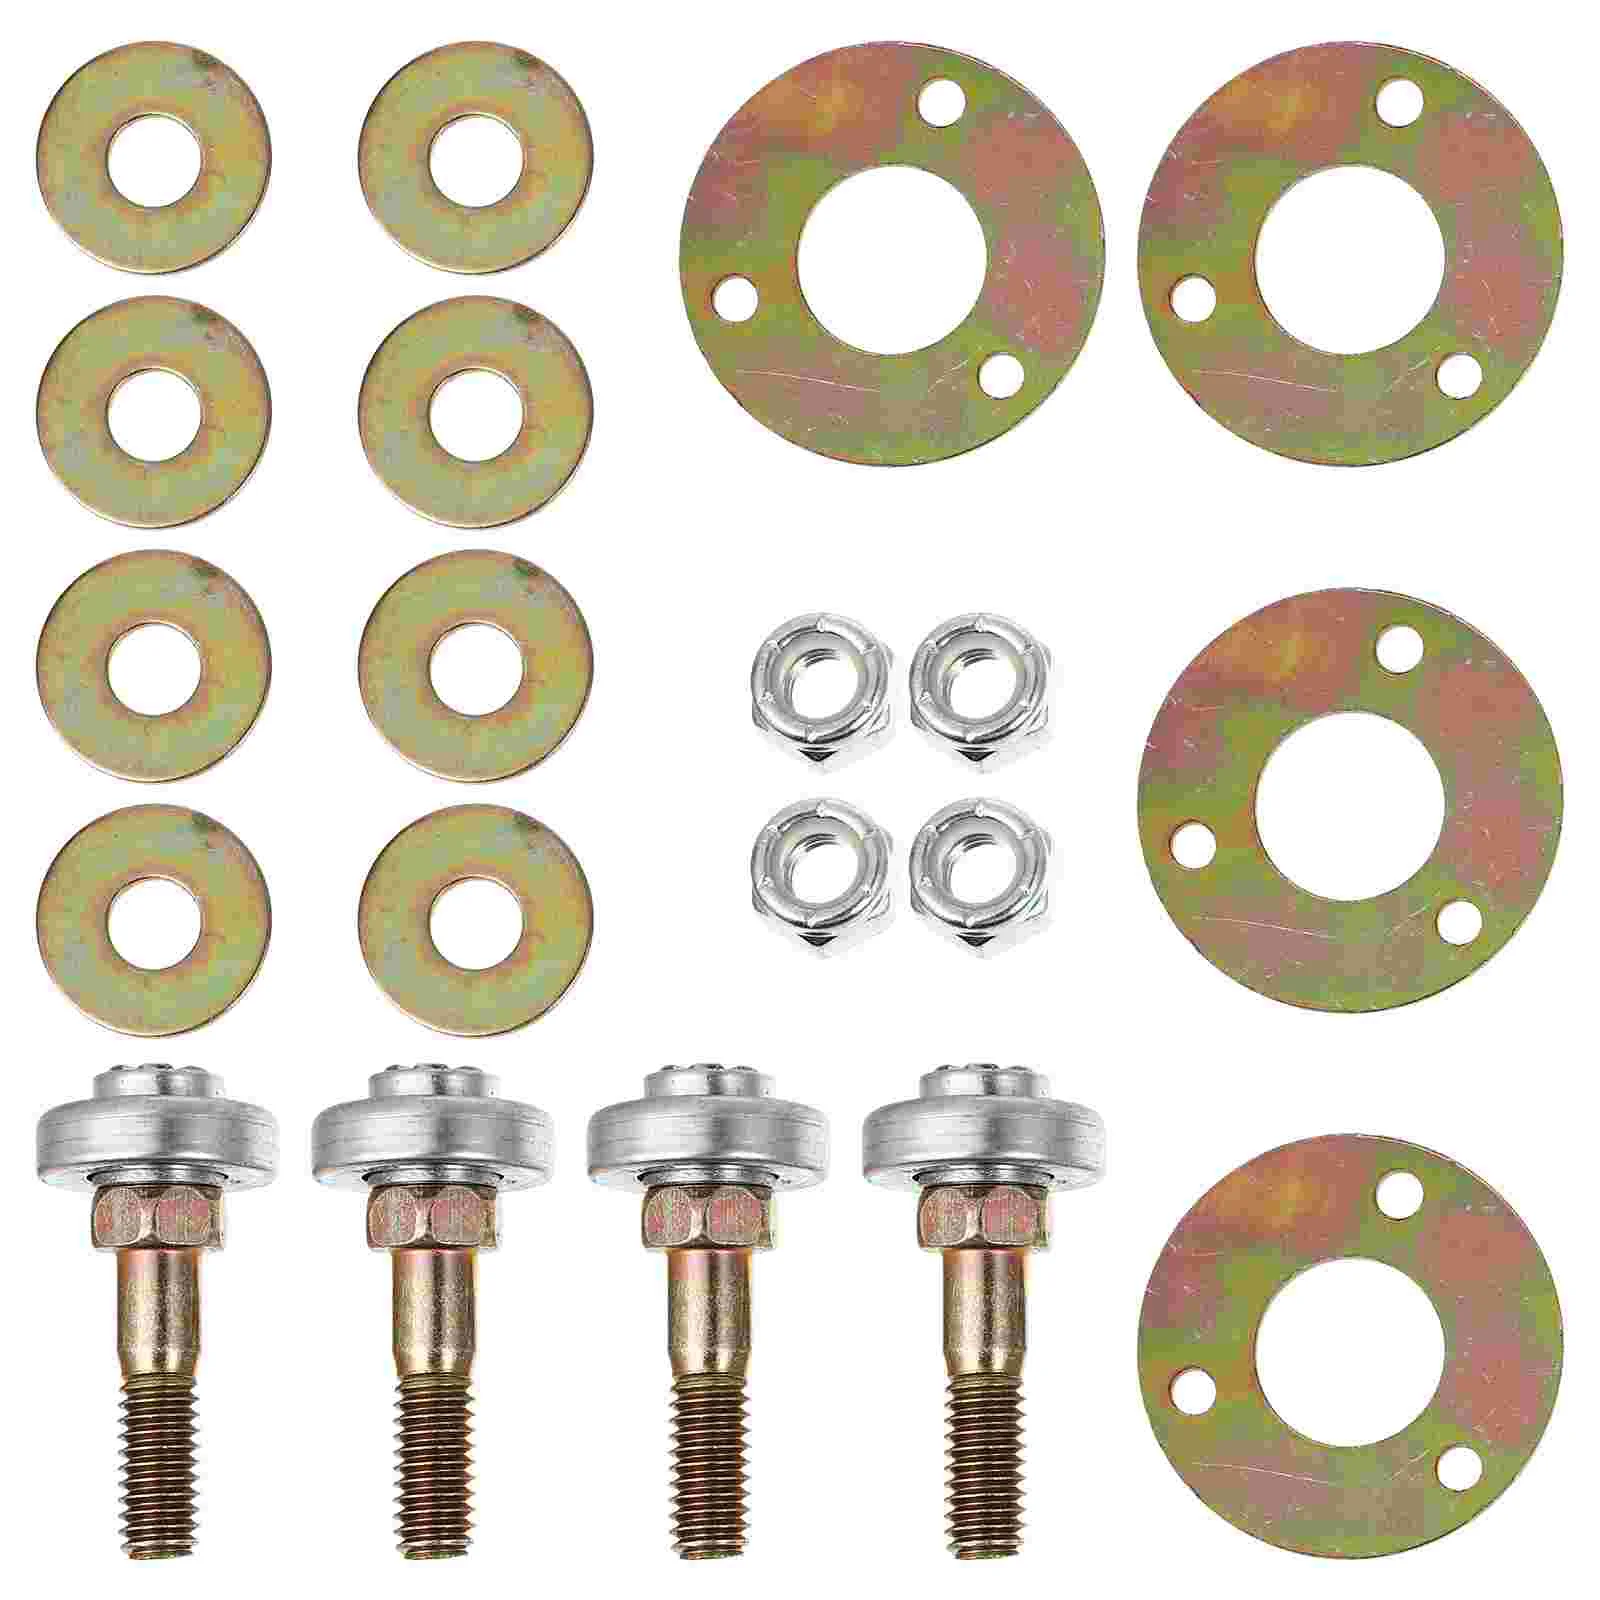 

Rocking Chair Bearing Furniture Connecting Fittings for Accessories Screws Kits Bolts